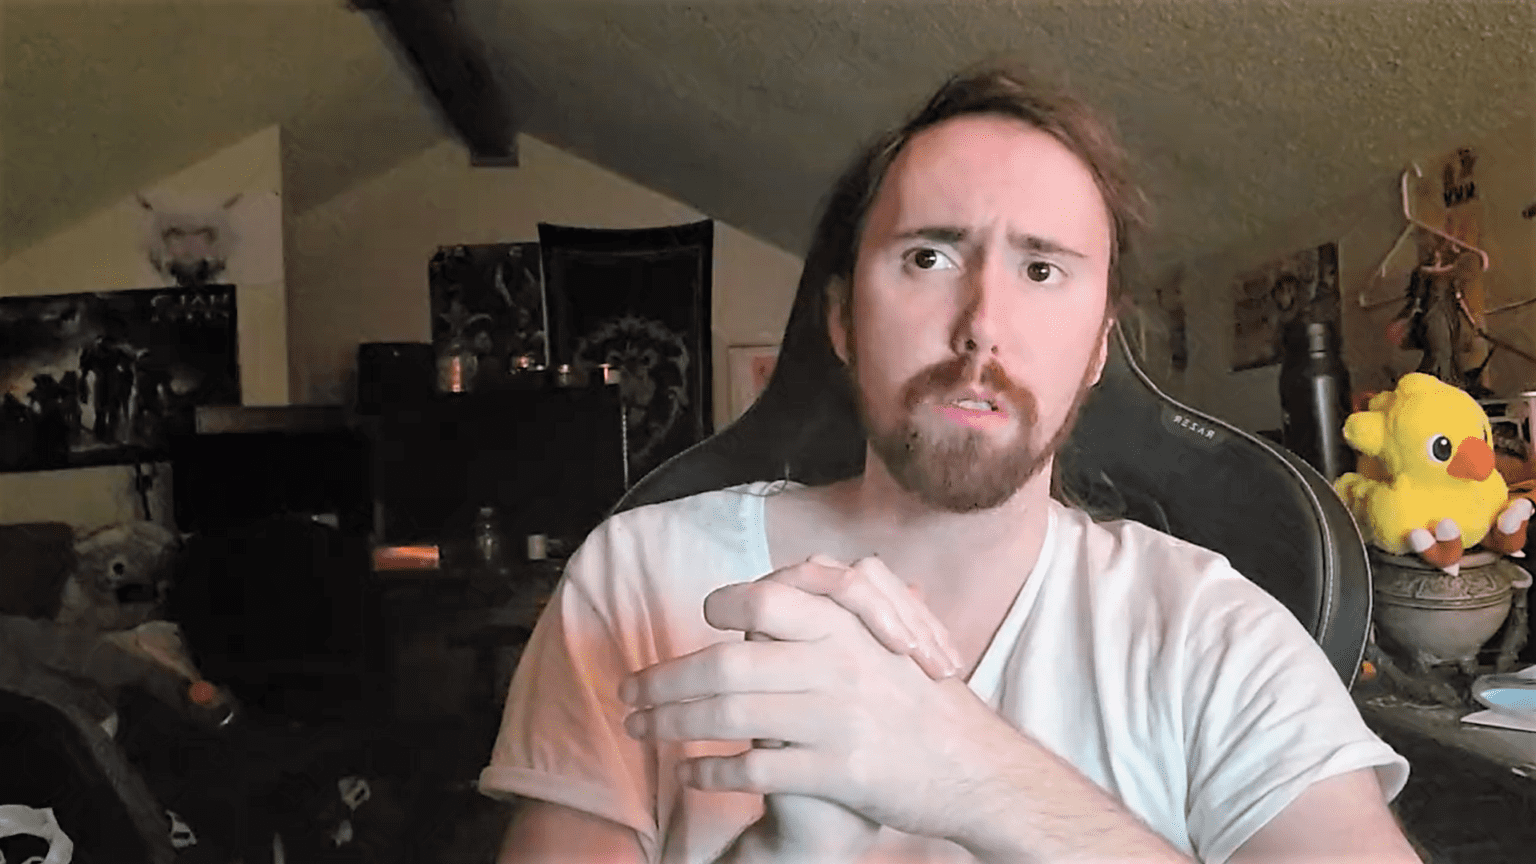 twitch streamer asmongold diablo 4 52b4 e9T6Rj - WTX News Breaking News, fashion & Culture from around the World - Daily News Briefings -Finance, Business, Politics & Sports News